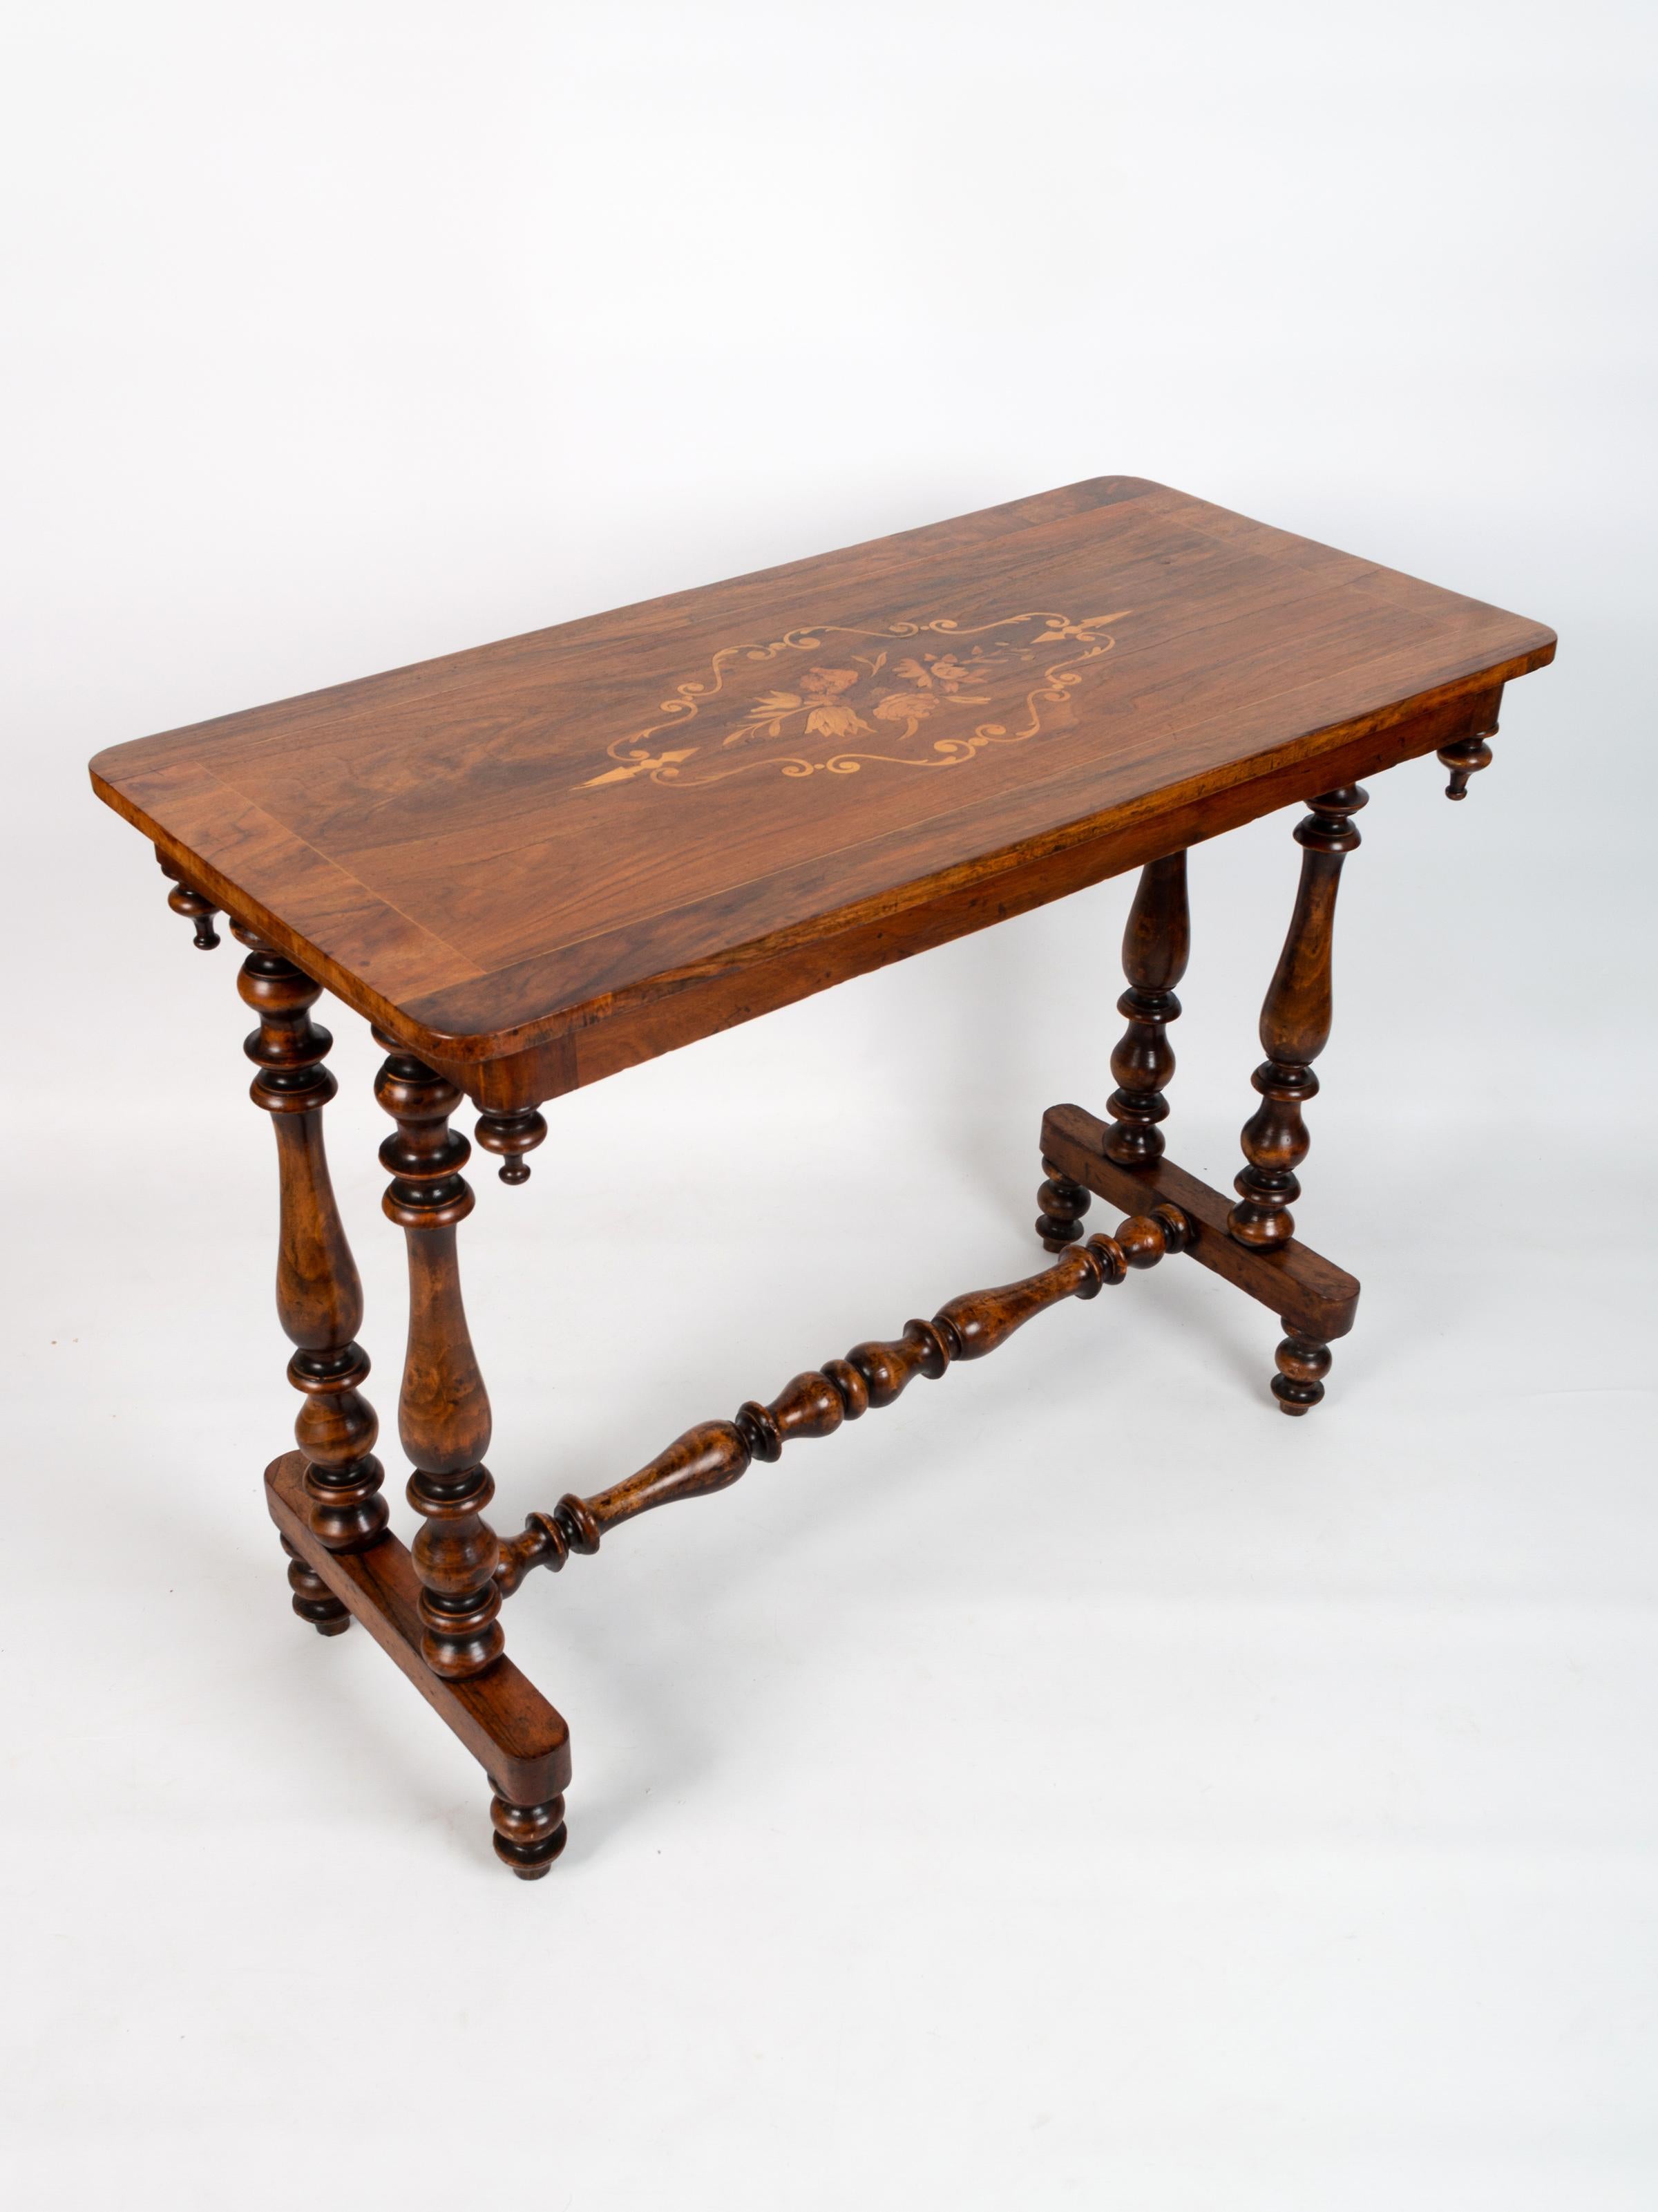 Antique English Edwardian Inlaid Walnut Hall Table Console C.1900 For Sale 2